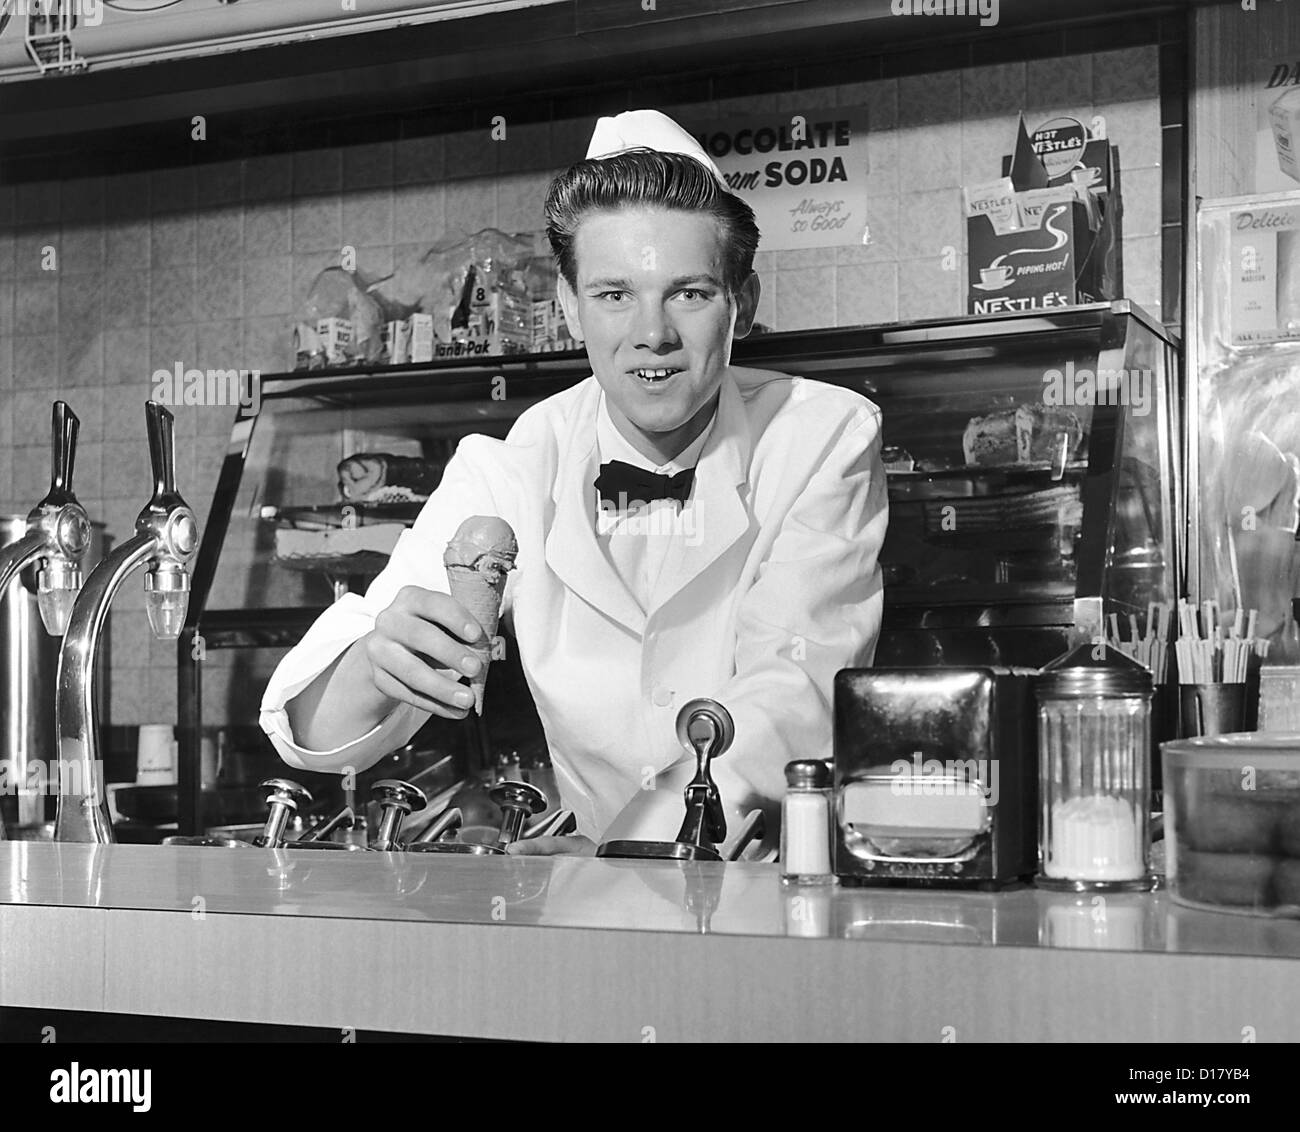 Soda jerk holding ice cream cone Banque D'Images